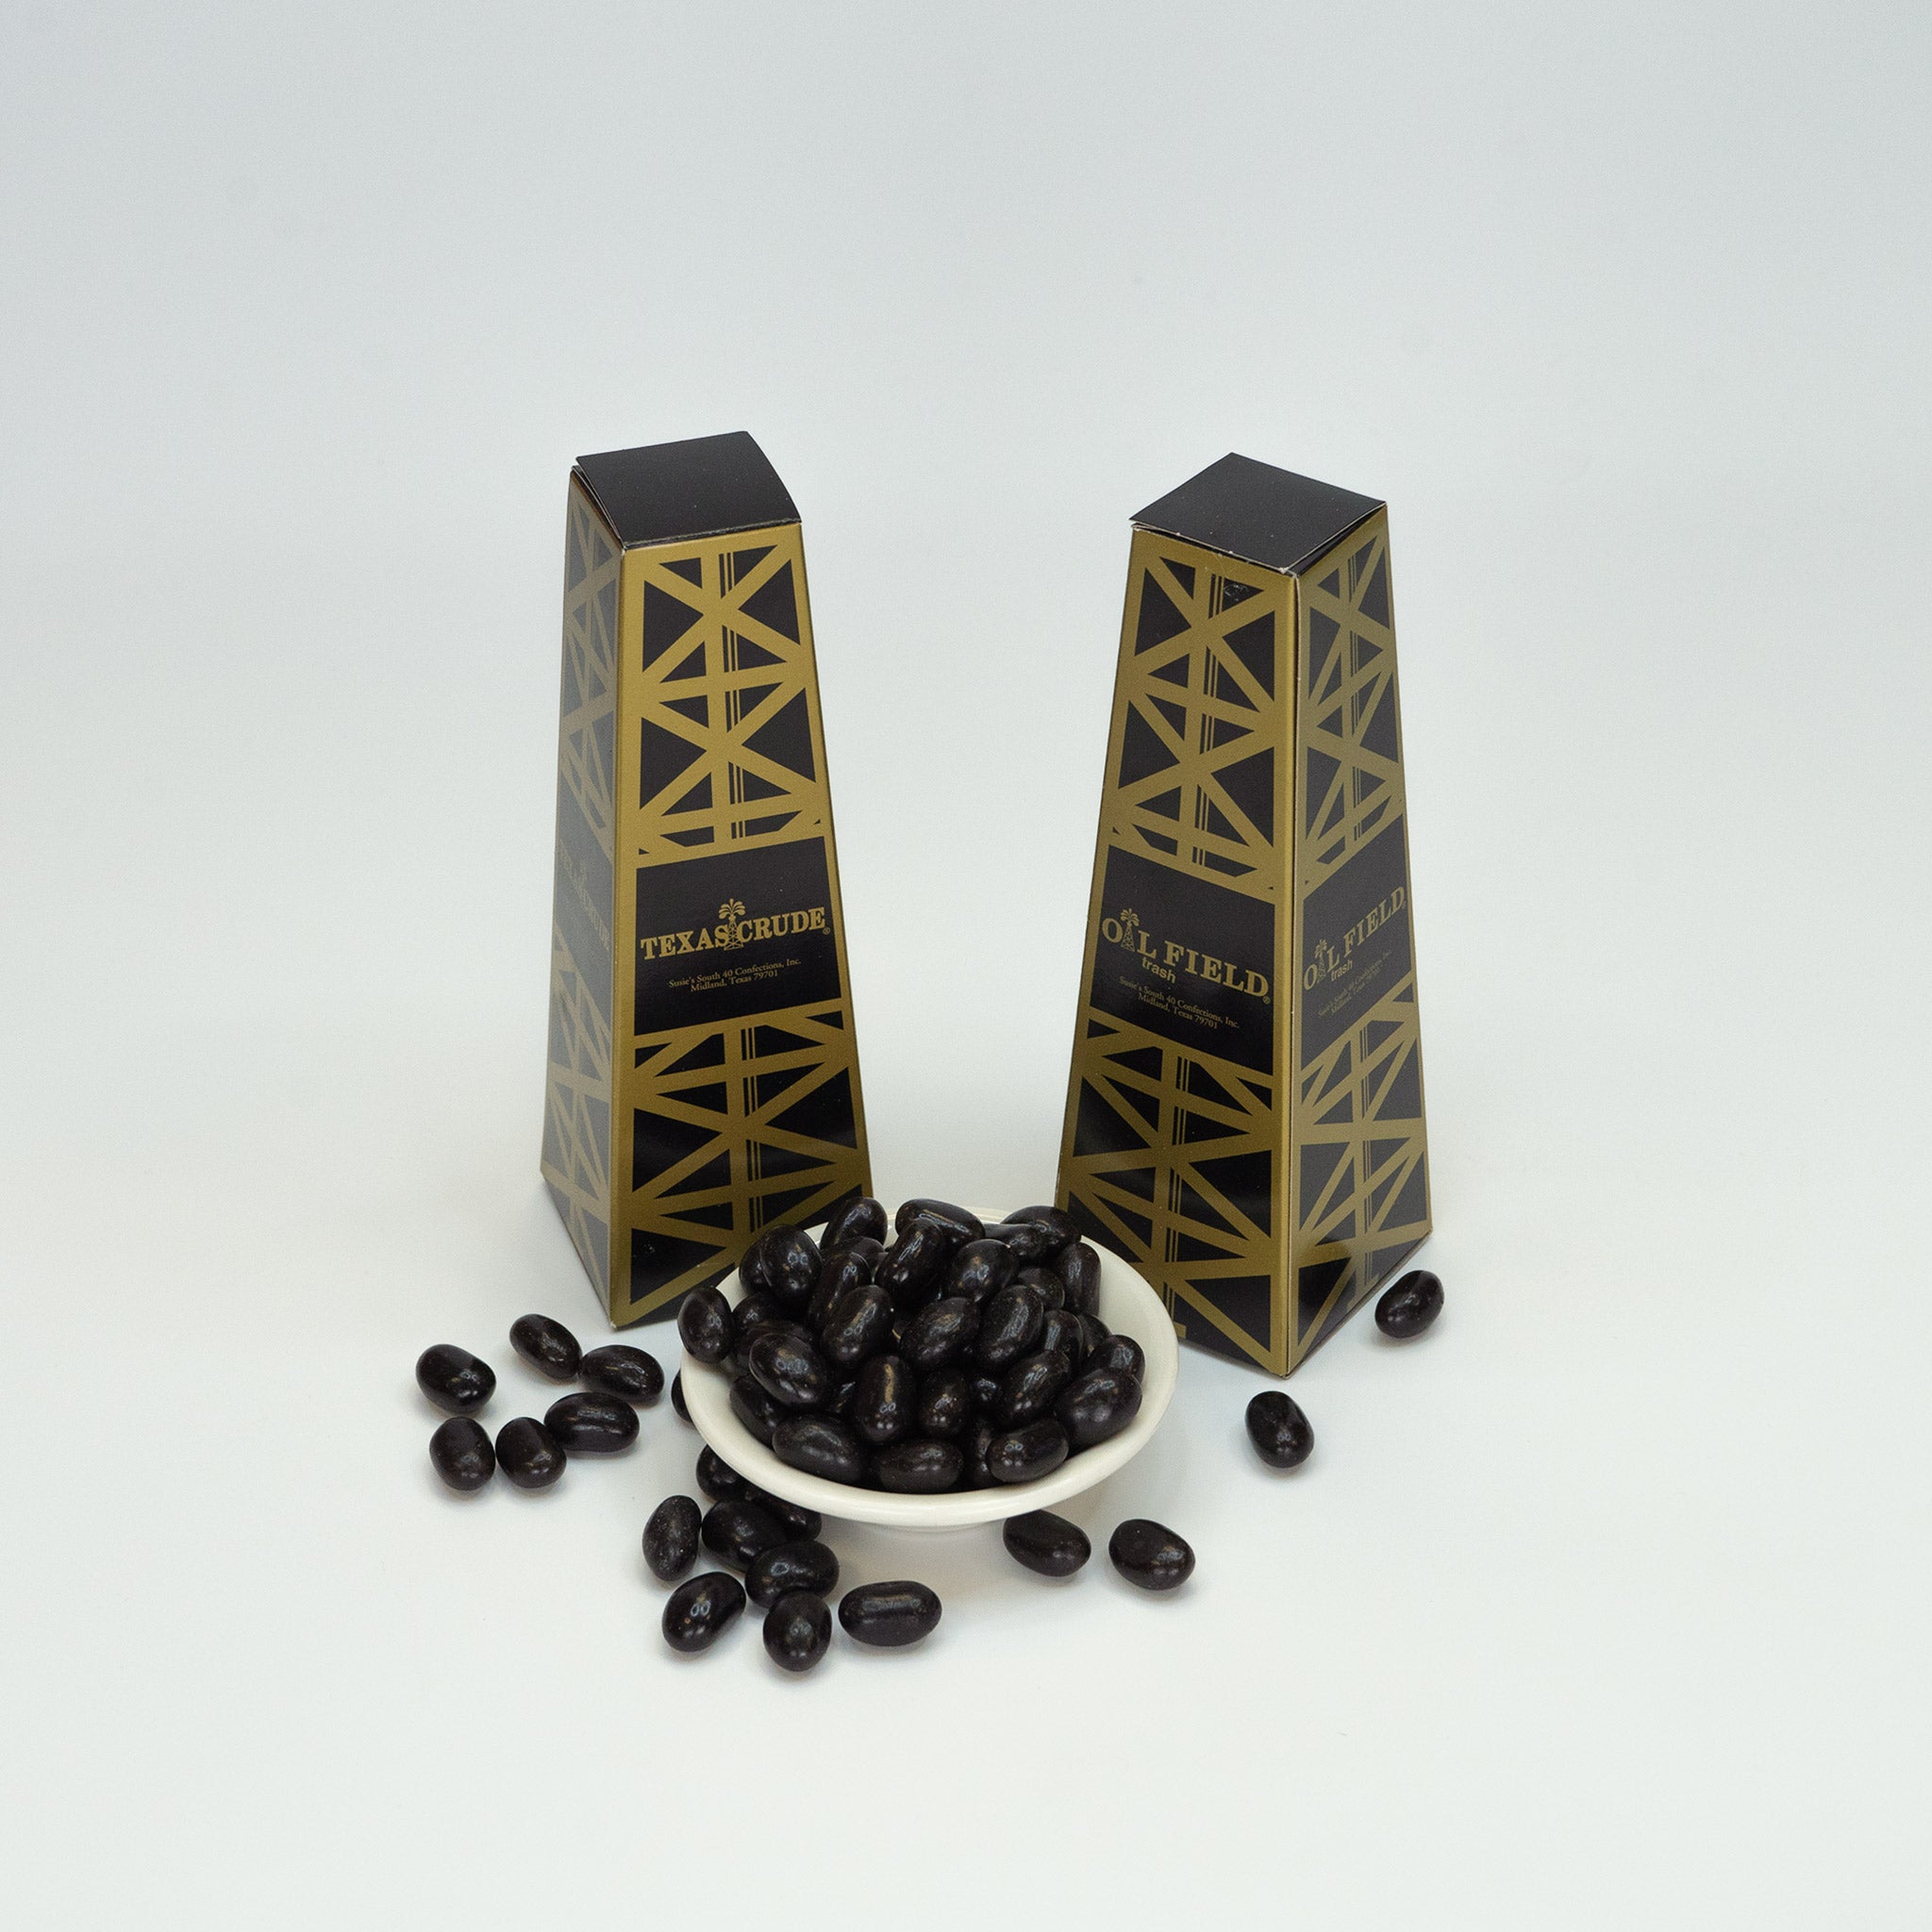 Oil Derrick filled with Licorice